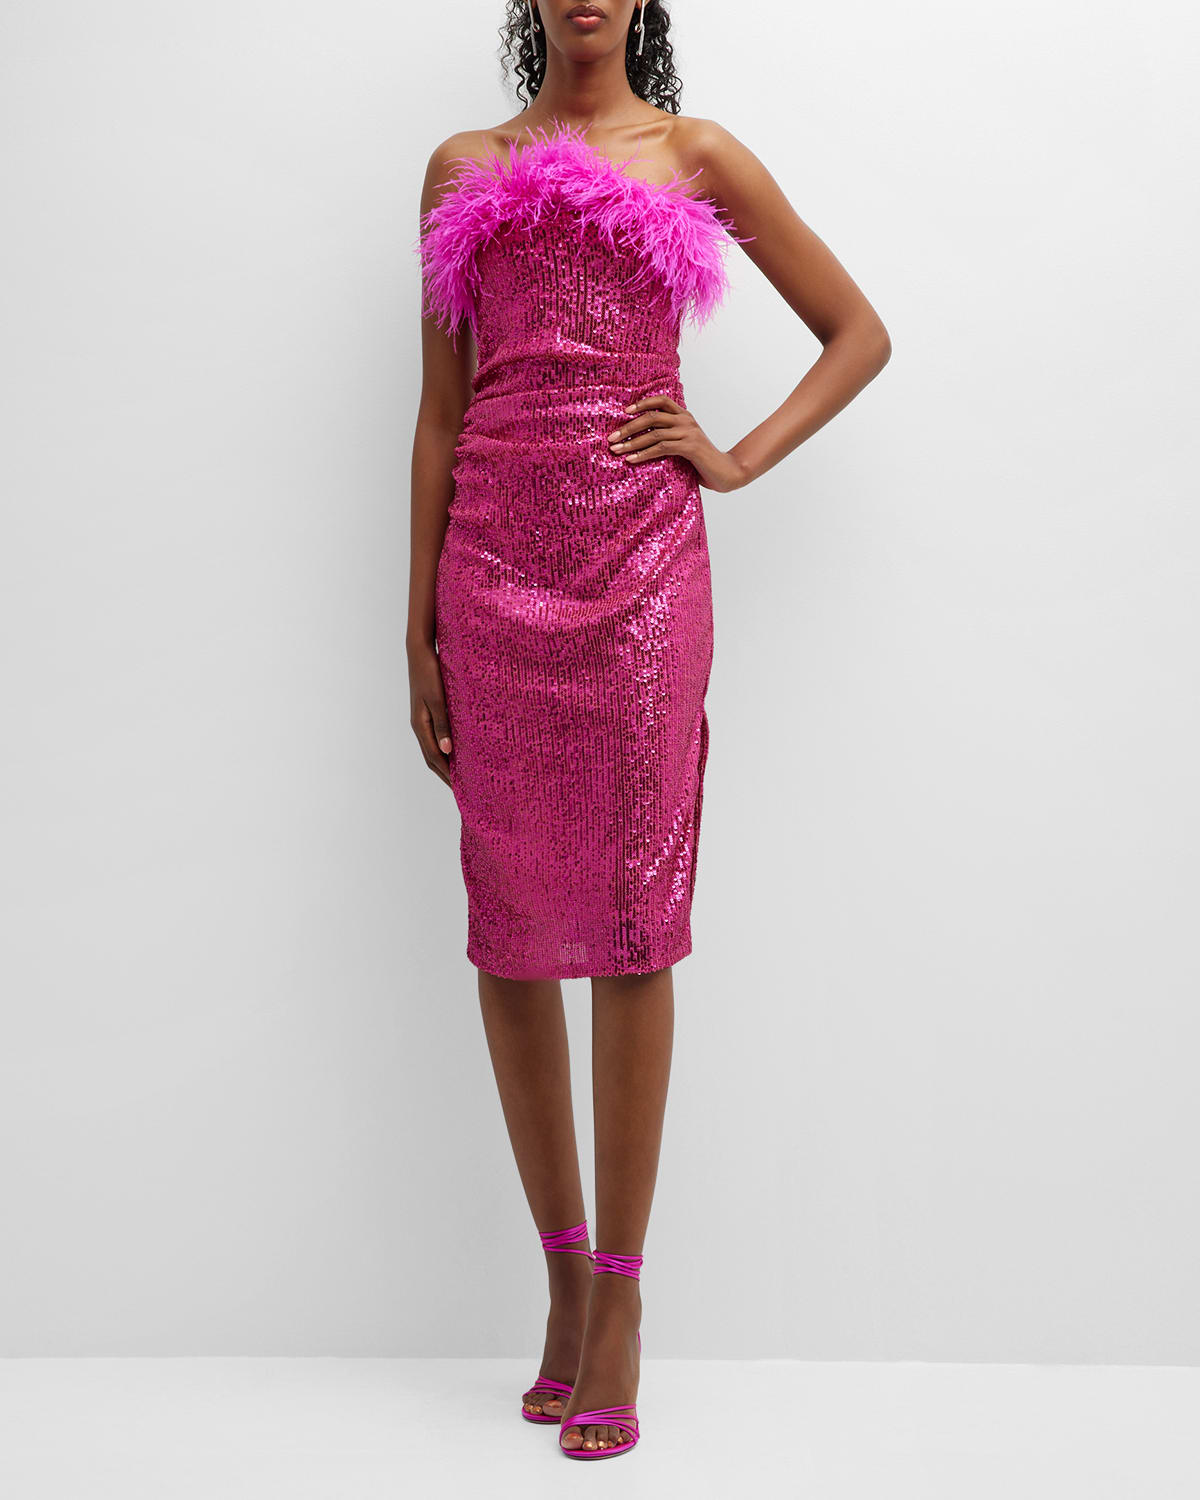 LACE The Label Strapless Feather-Trim Sequin Midi Dress